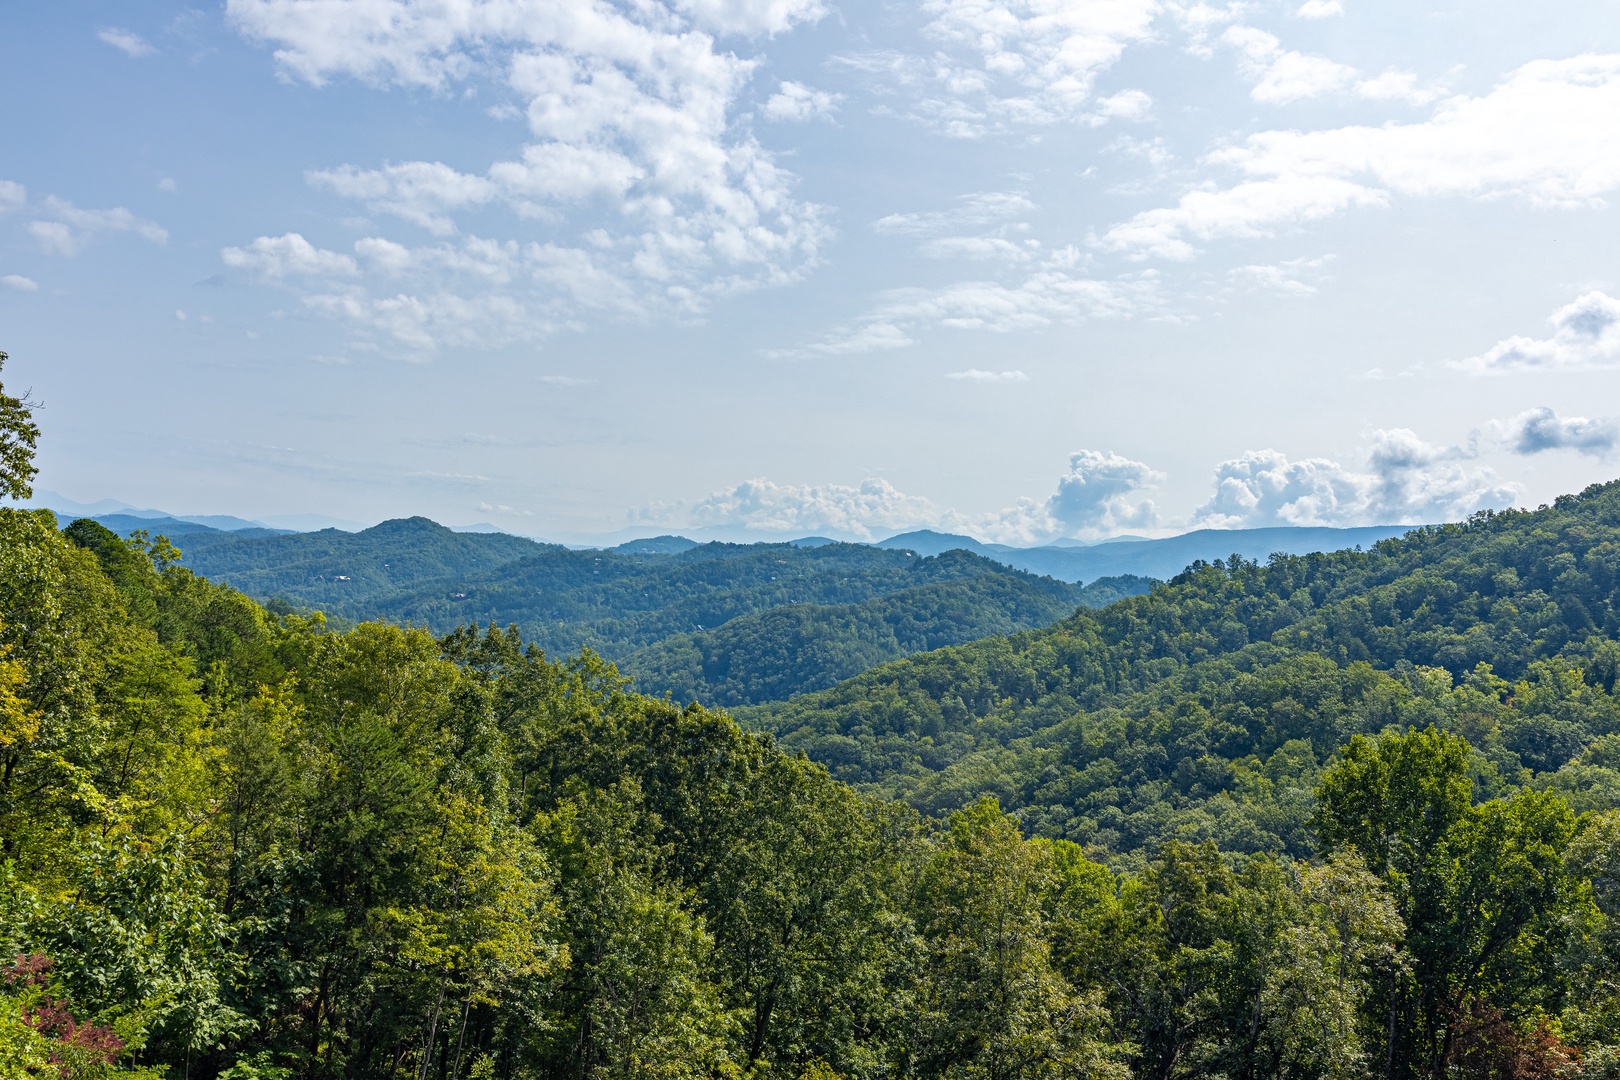 Mountain view at Black Bears & Biscuits Lodge, a 6 bedroom cabin rental located in Pigeon Forge